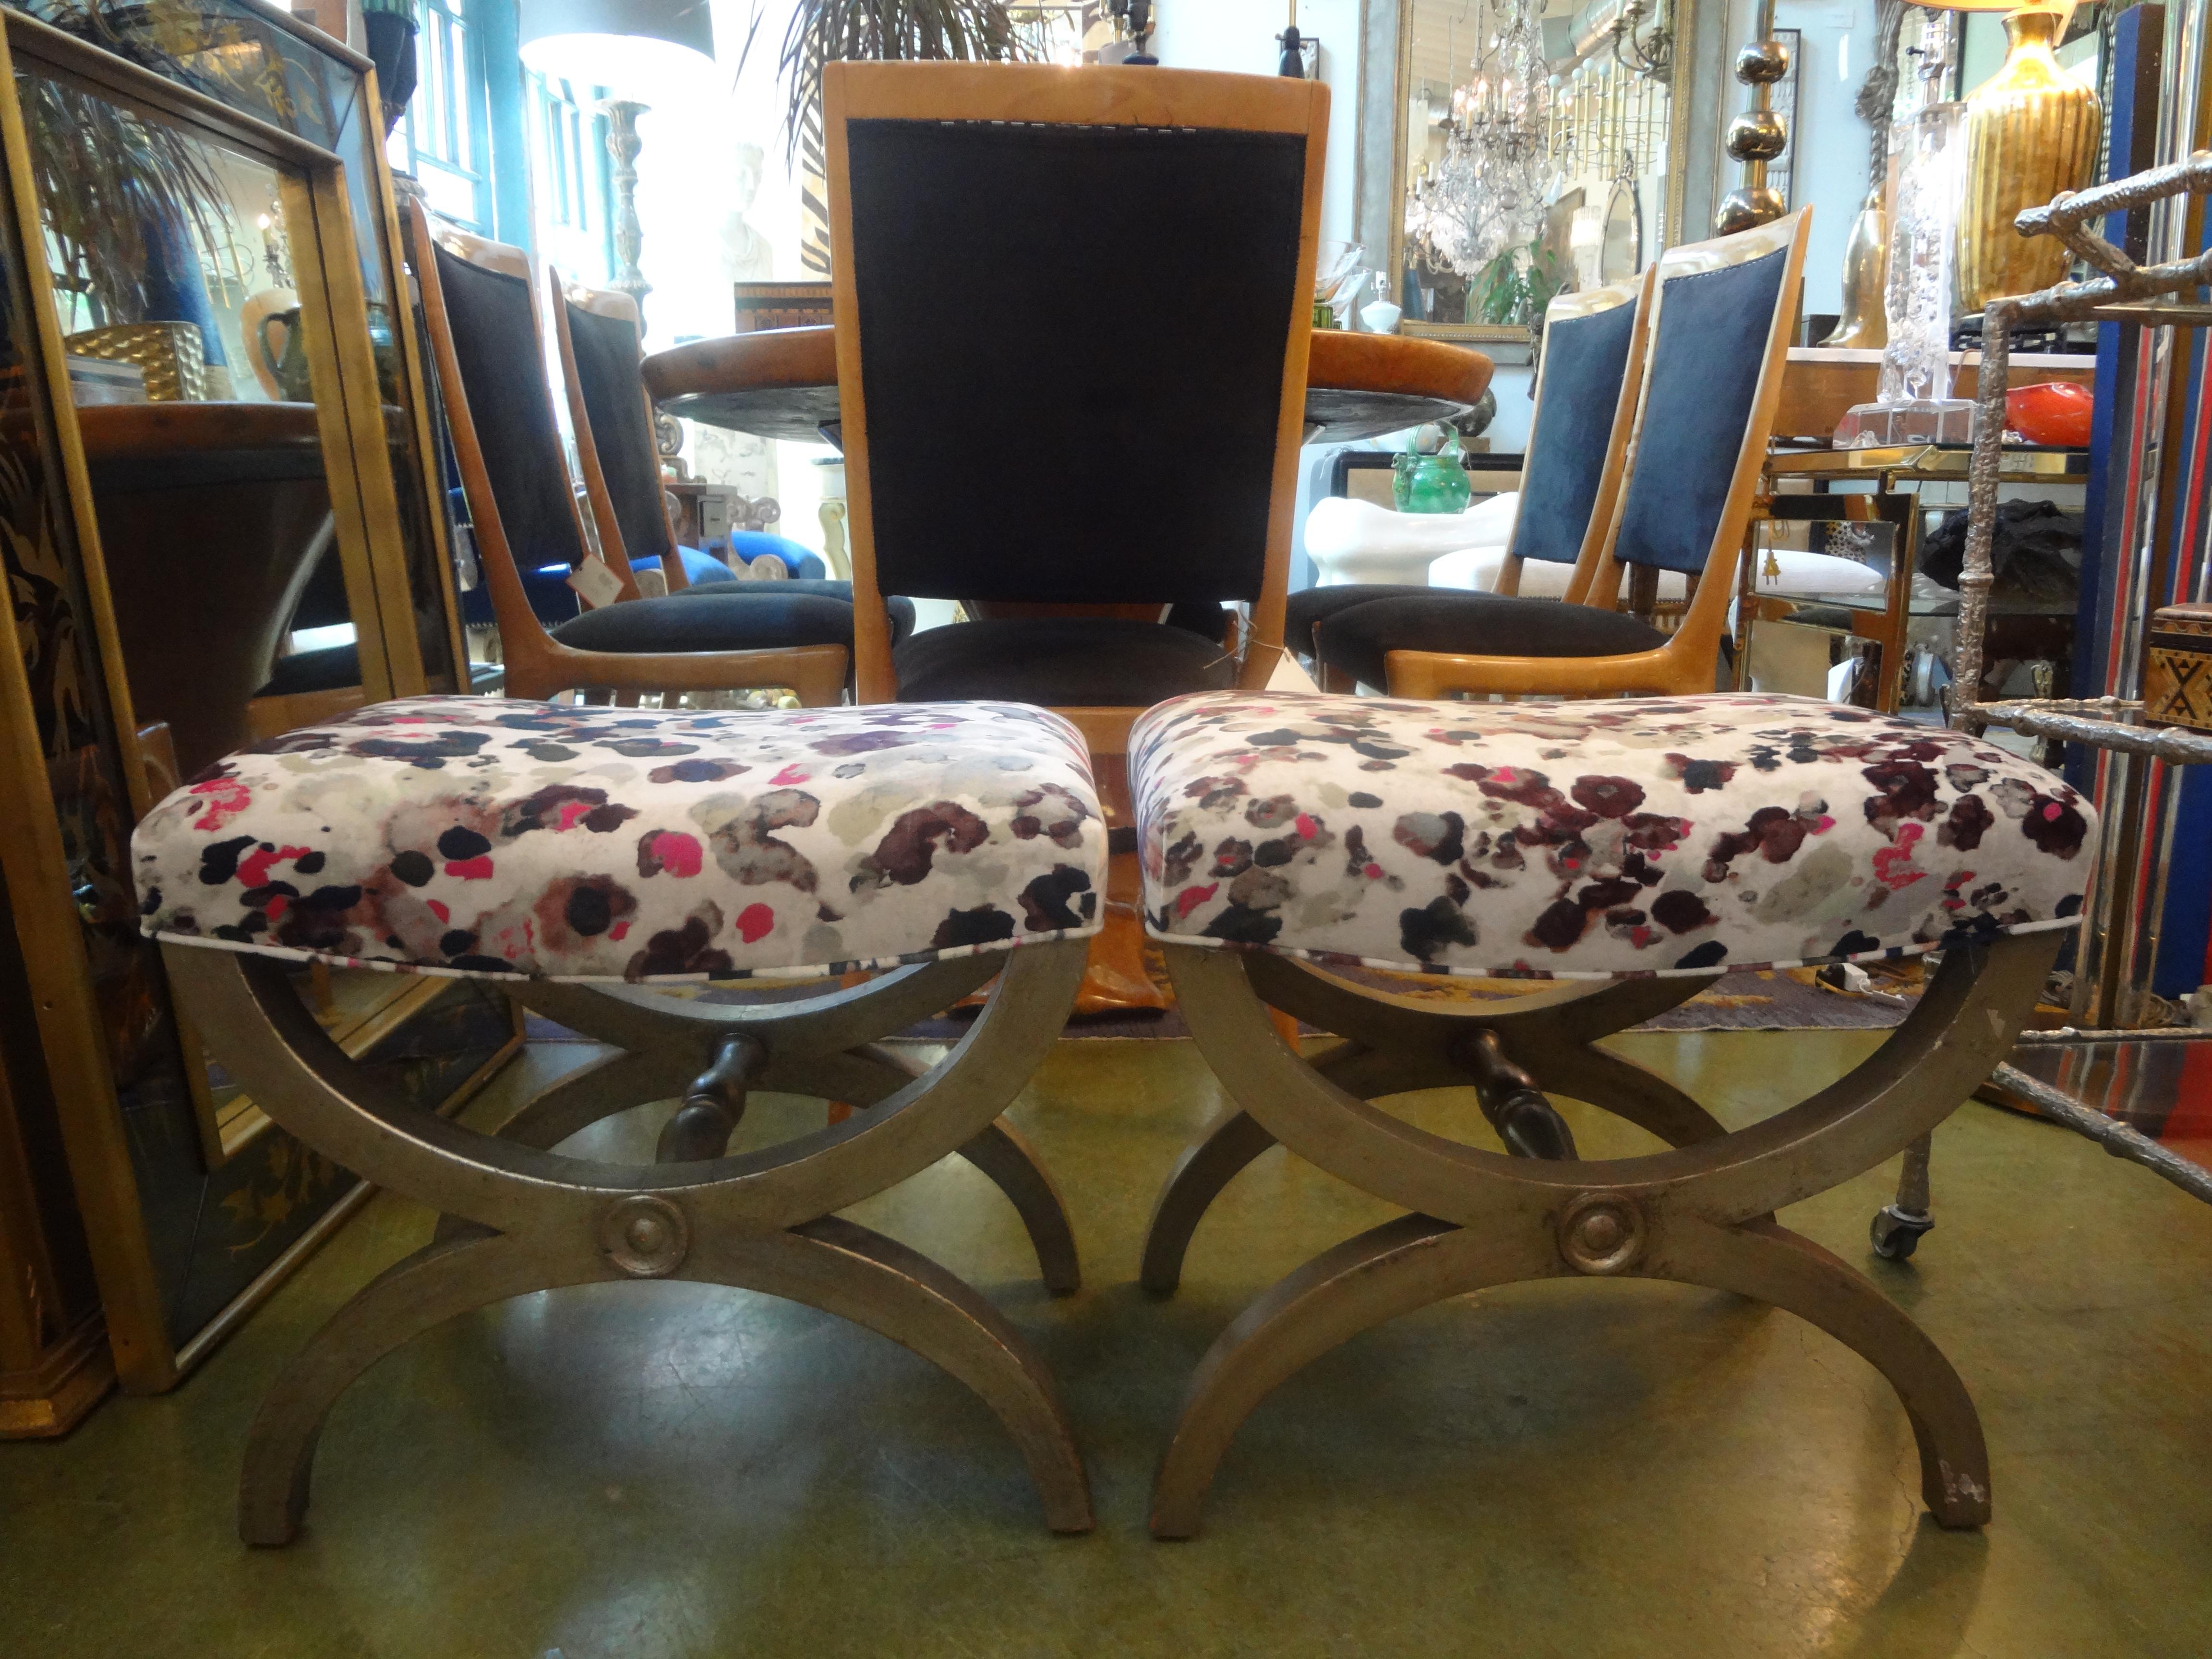 Stunning pair of vintage Italian silver giltwood or silver leaf benches or ottomans. This matching pair of x shaped silver benches, stools or ottomans are good sized and usable for extra seating where needed. These gorgeous Italian silver gilt wood